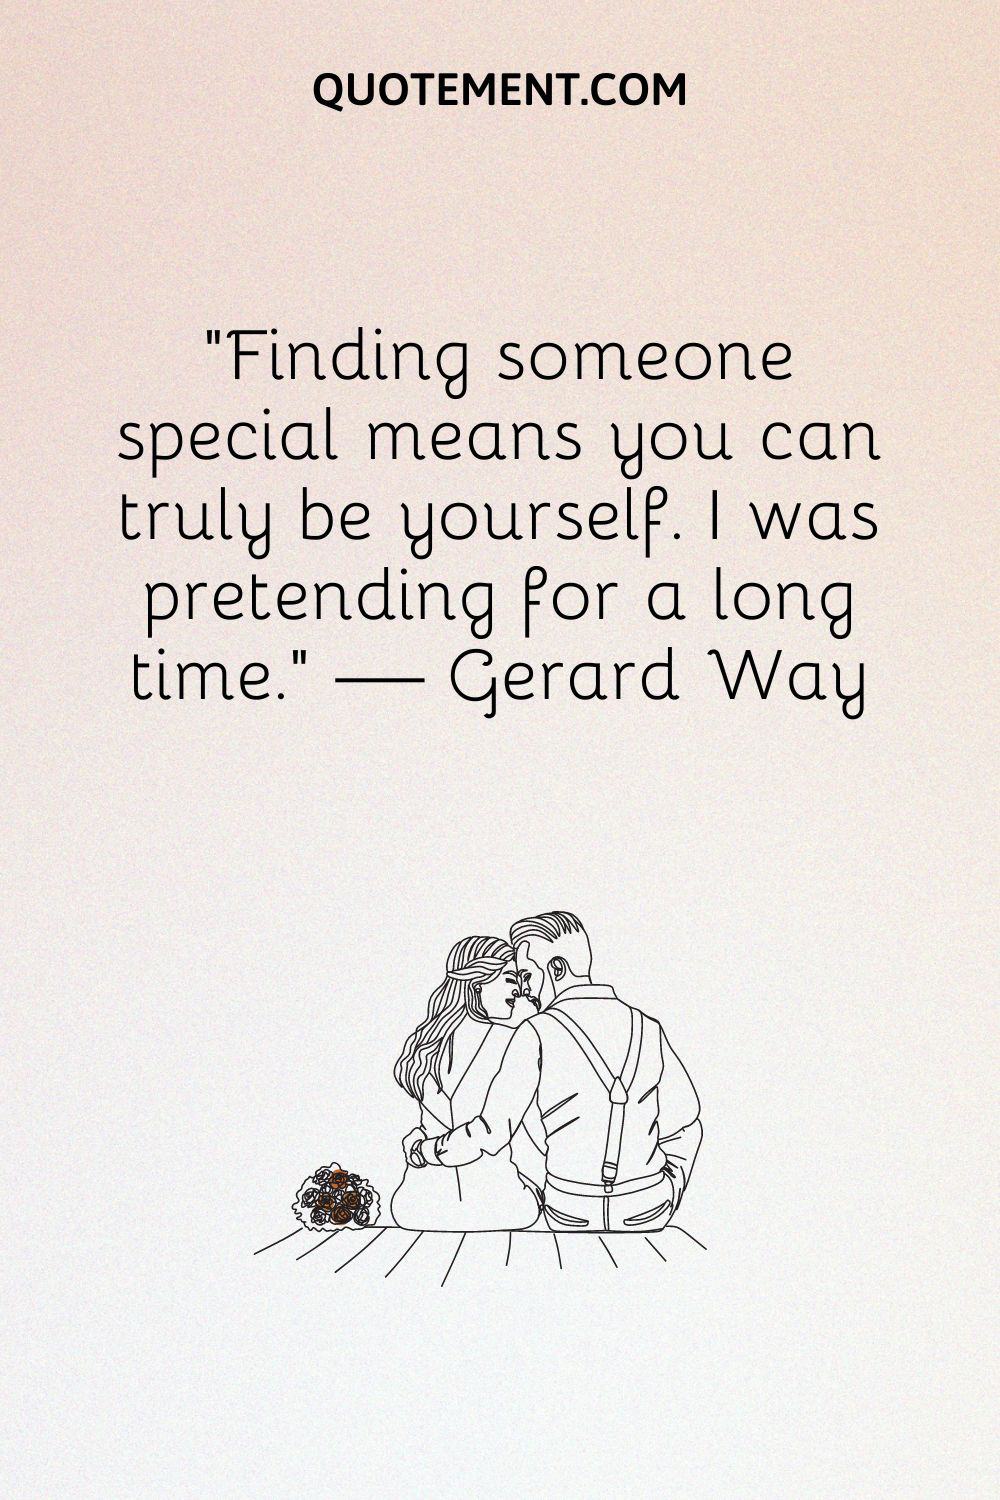 man hugging woman illustration representing finding someone special quote